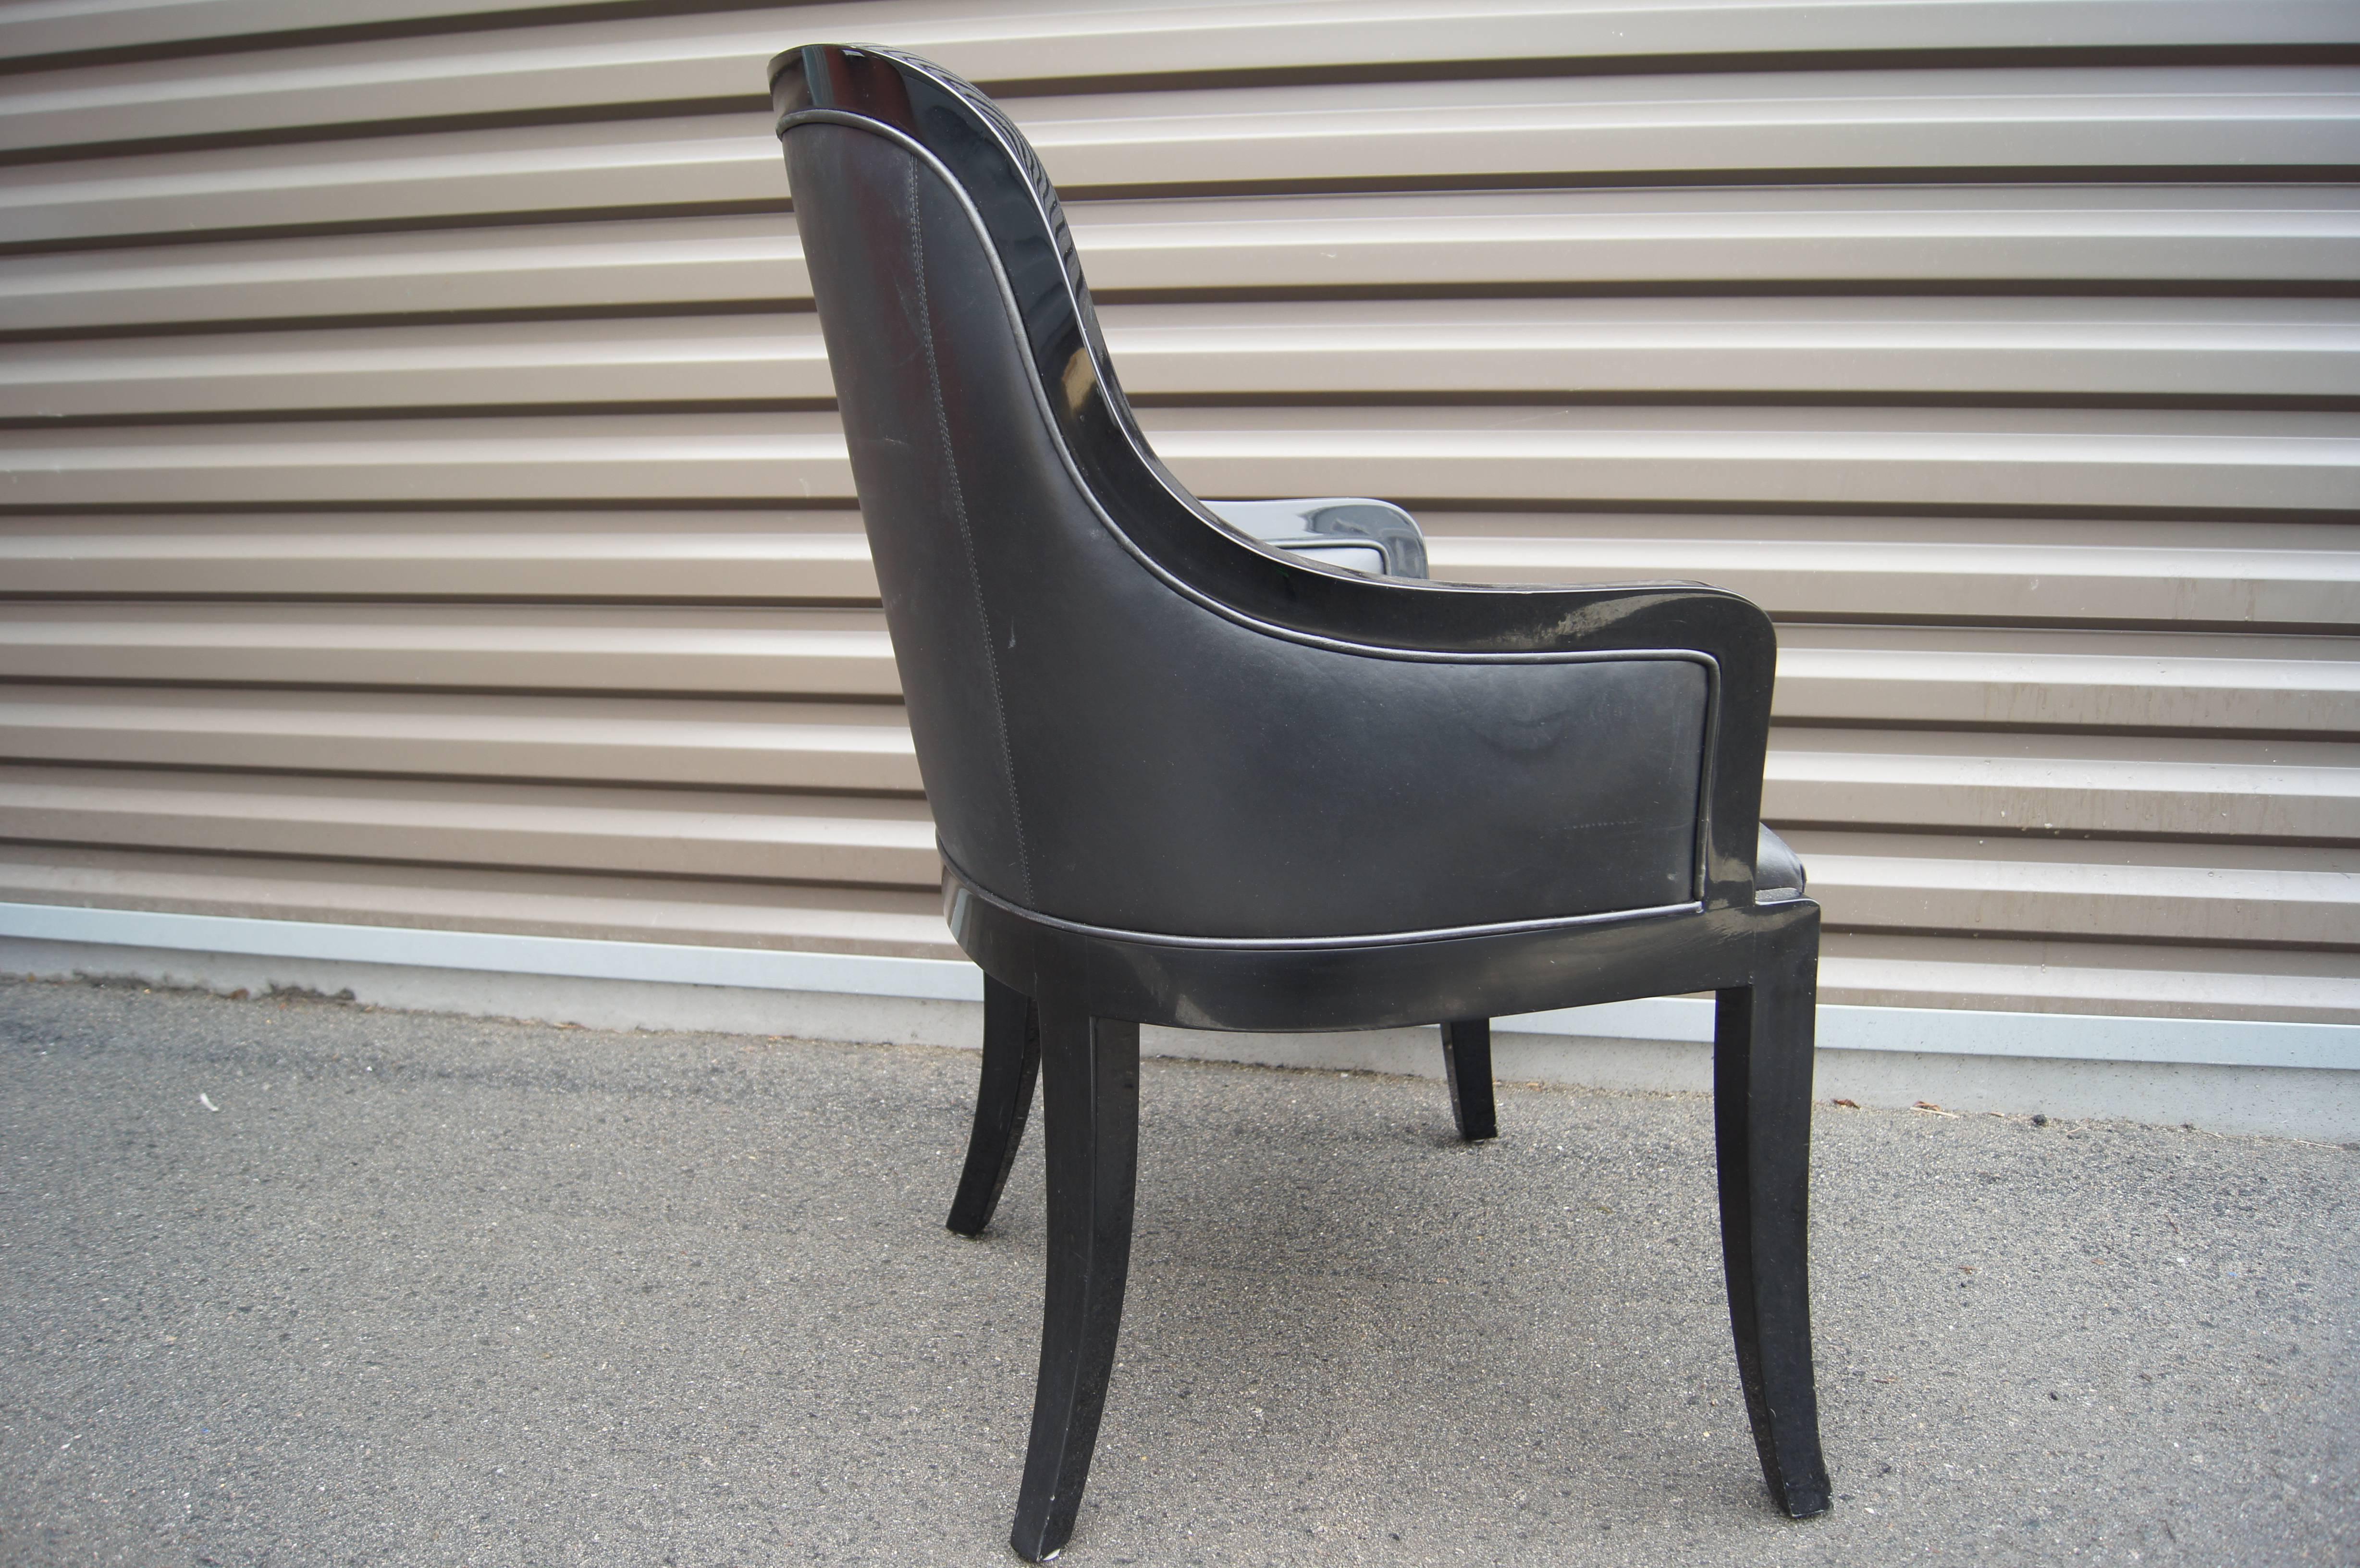 Karl Springer's sleek and chic Regina armchair features a curvaceous frame of high-gloss black lacquer and tailored black leather upholstery

Two armchairs are available.